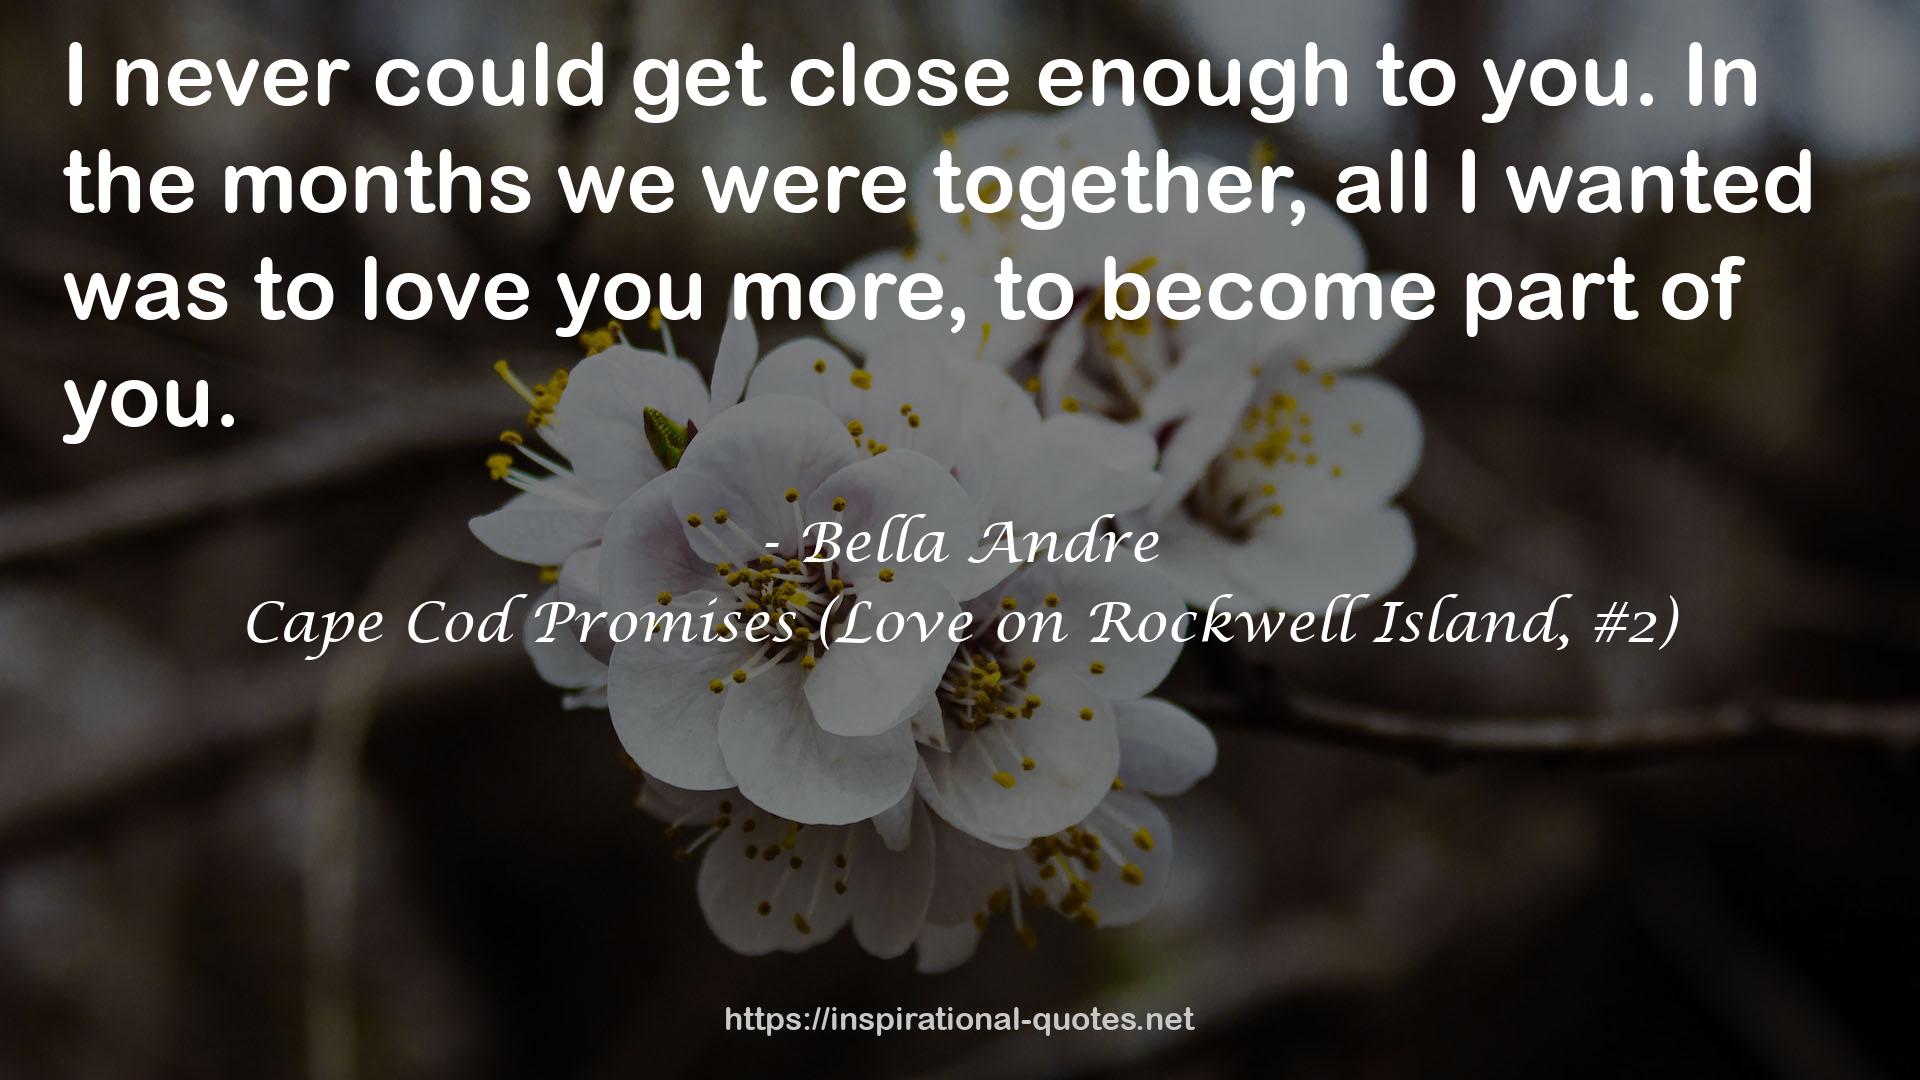 Cape Cod Promises (Love on Rockwell Island, #2) QUOTES